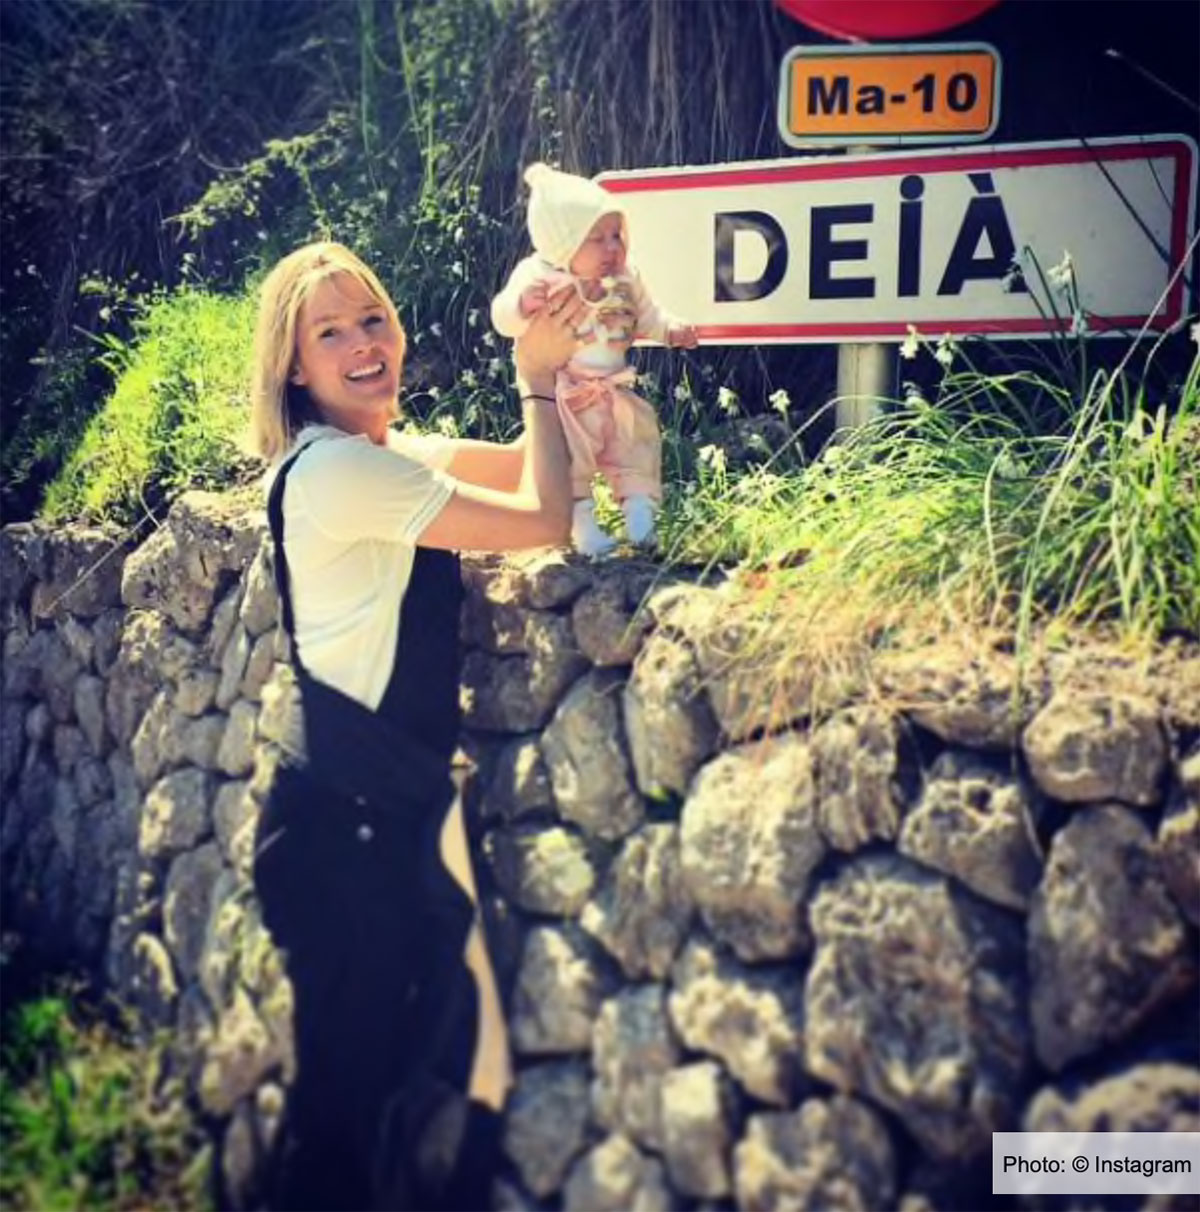 Lady holding baby up to Deia village sign in Mallorca